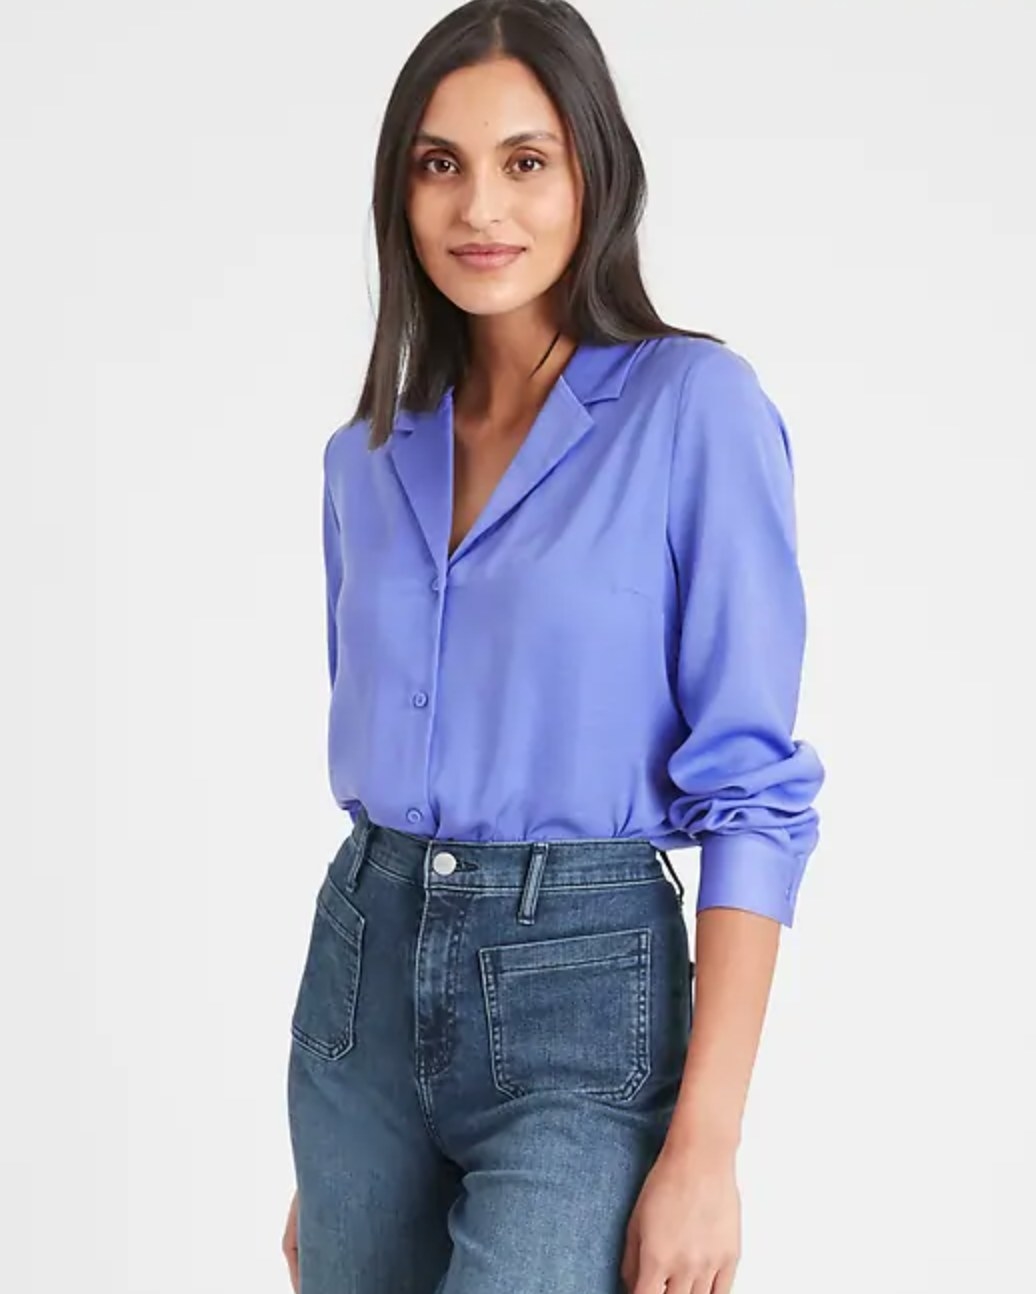 Banana Republic Factory Is Gracing Us With 60% Off Everything On Their Site